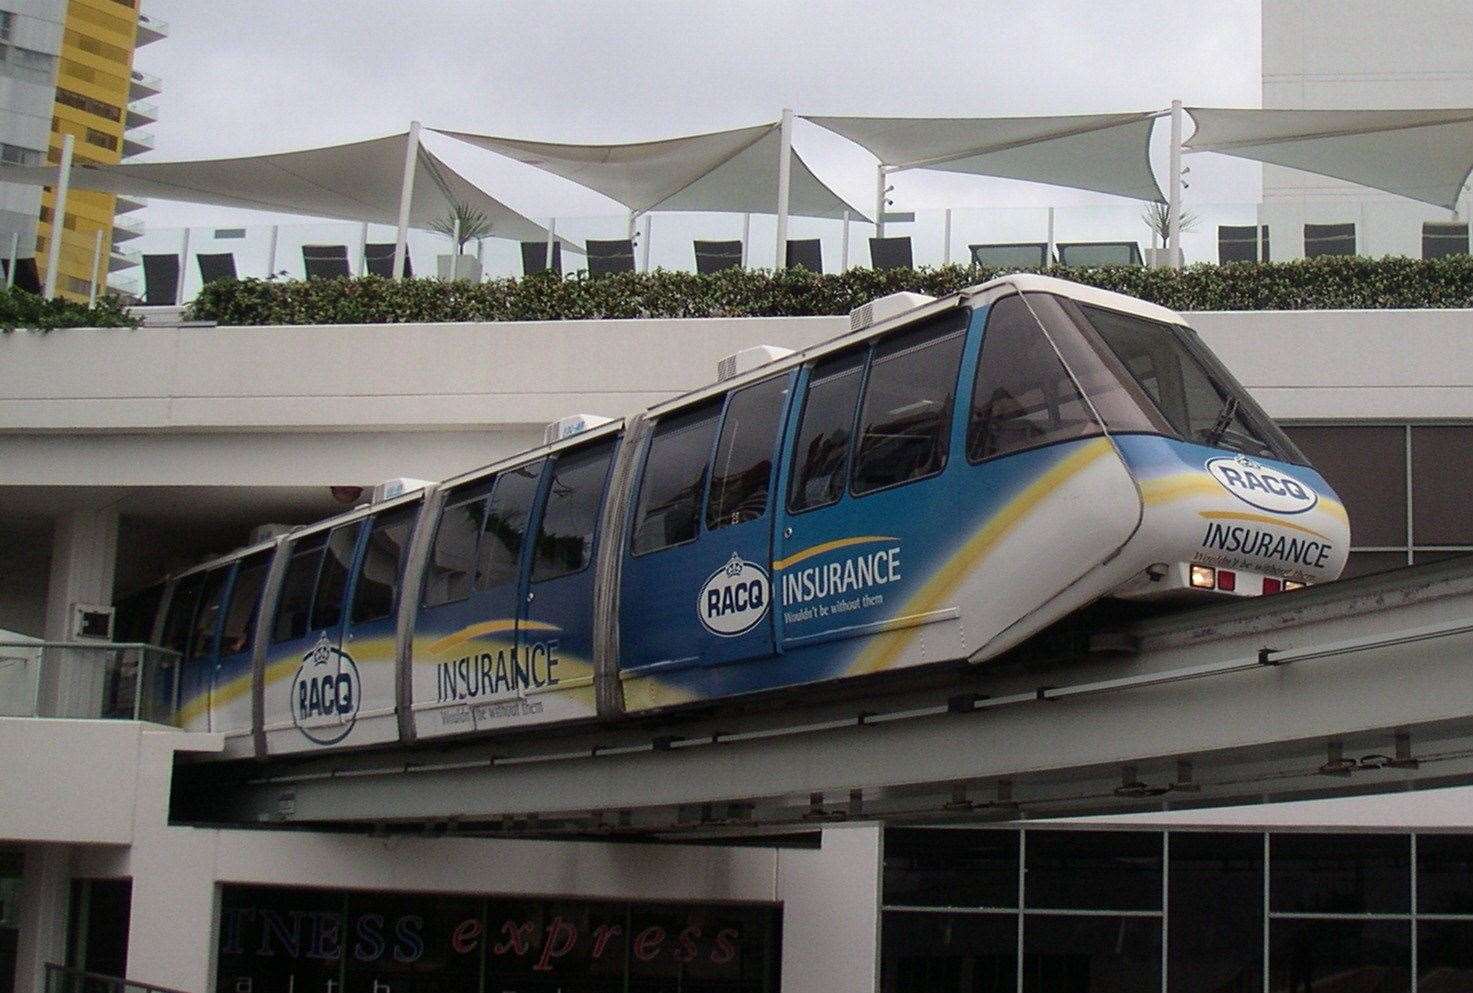 An example of a working monorail in the city of Gold Coast, Queensland, Australia. After almost 30 years in operation, the line closed in 2017